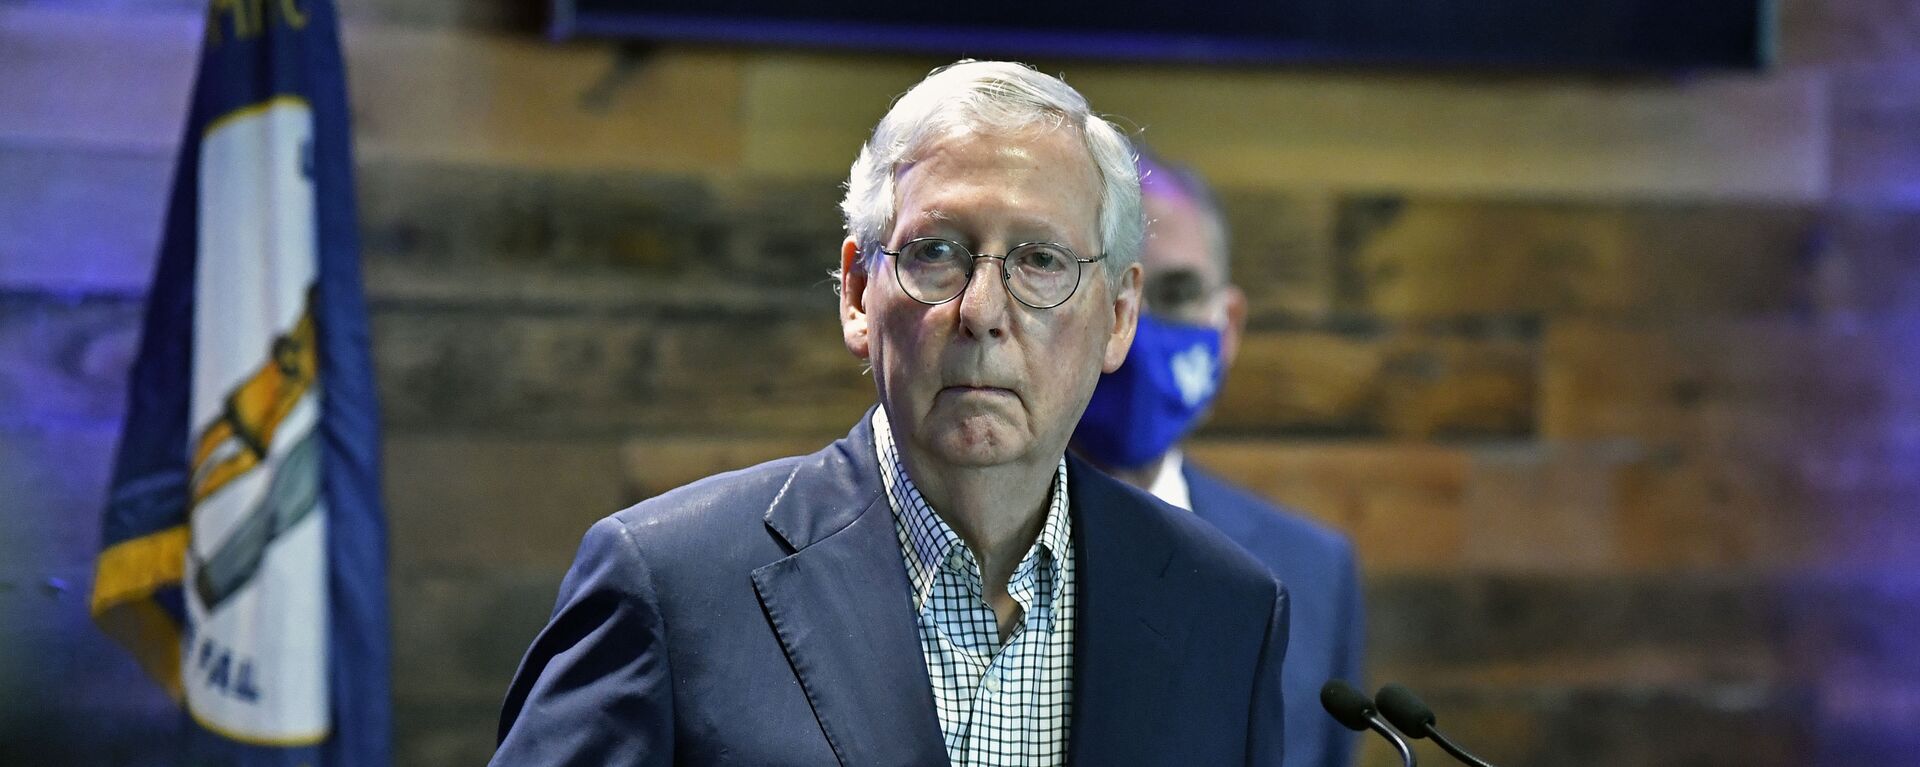 Senate Minority Leader Mitch McConnell, R-Ky., listens to a reporter's question during a news conference at a COVID-19 vaccination site in Lexington, Ky., Monday, April 5, 2021. - Sputnik International, 1920, 08.05.2022